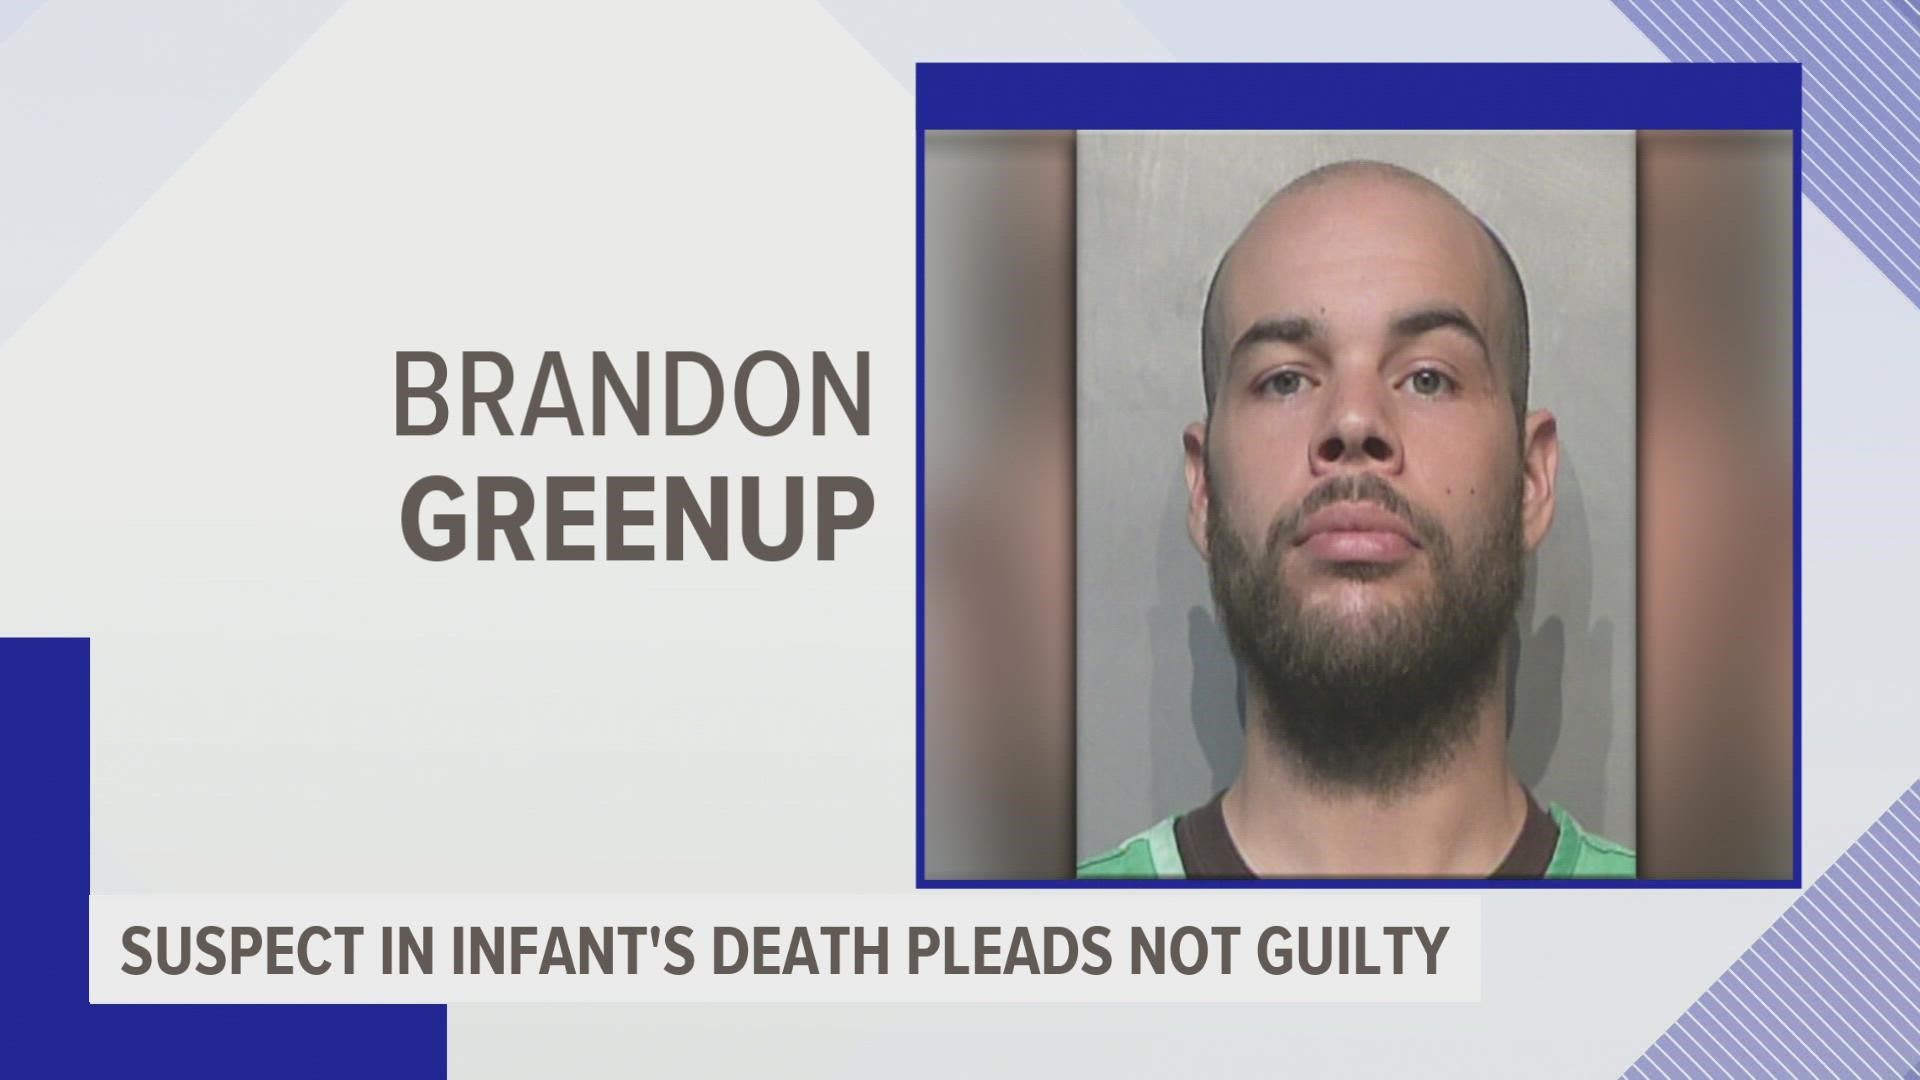 Brandon Greenup, 28, is charged with first-degree murder in the death of Tremir Matthews.